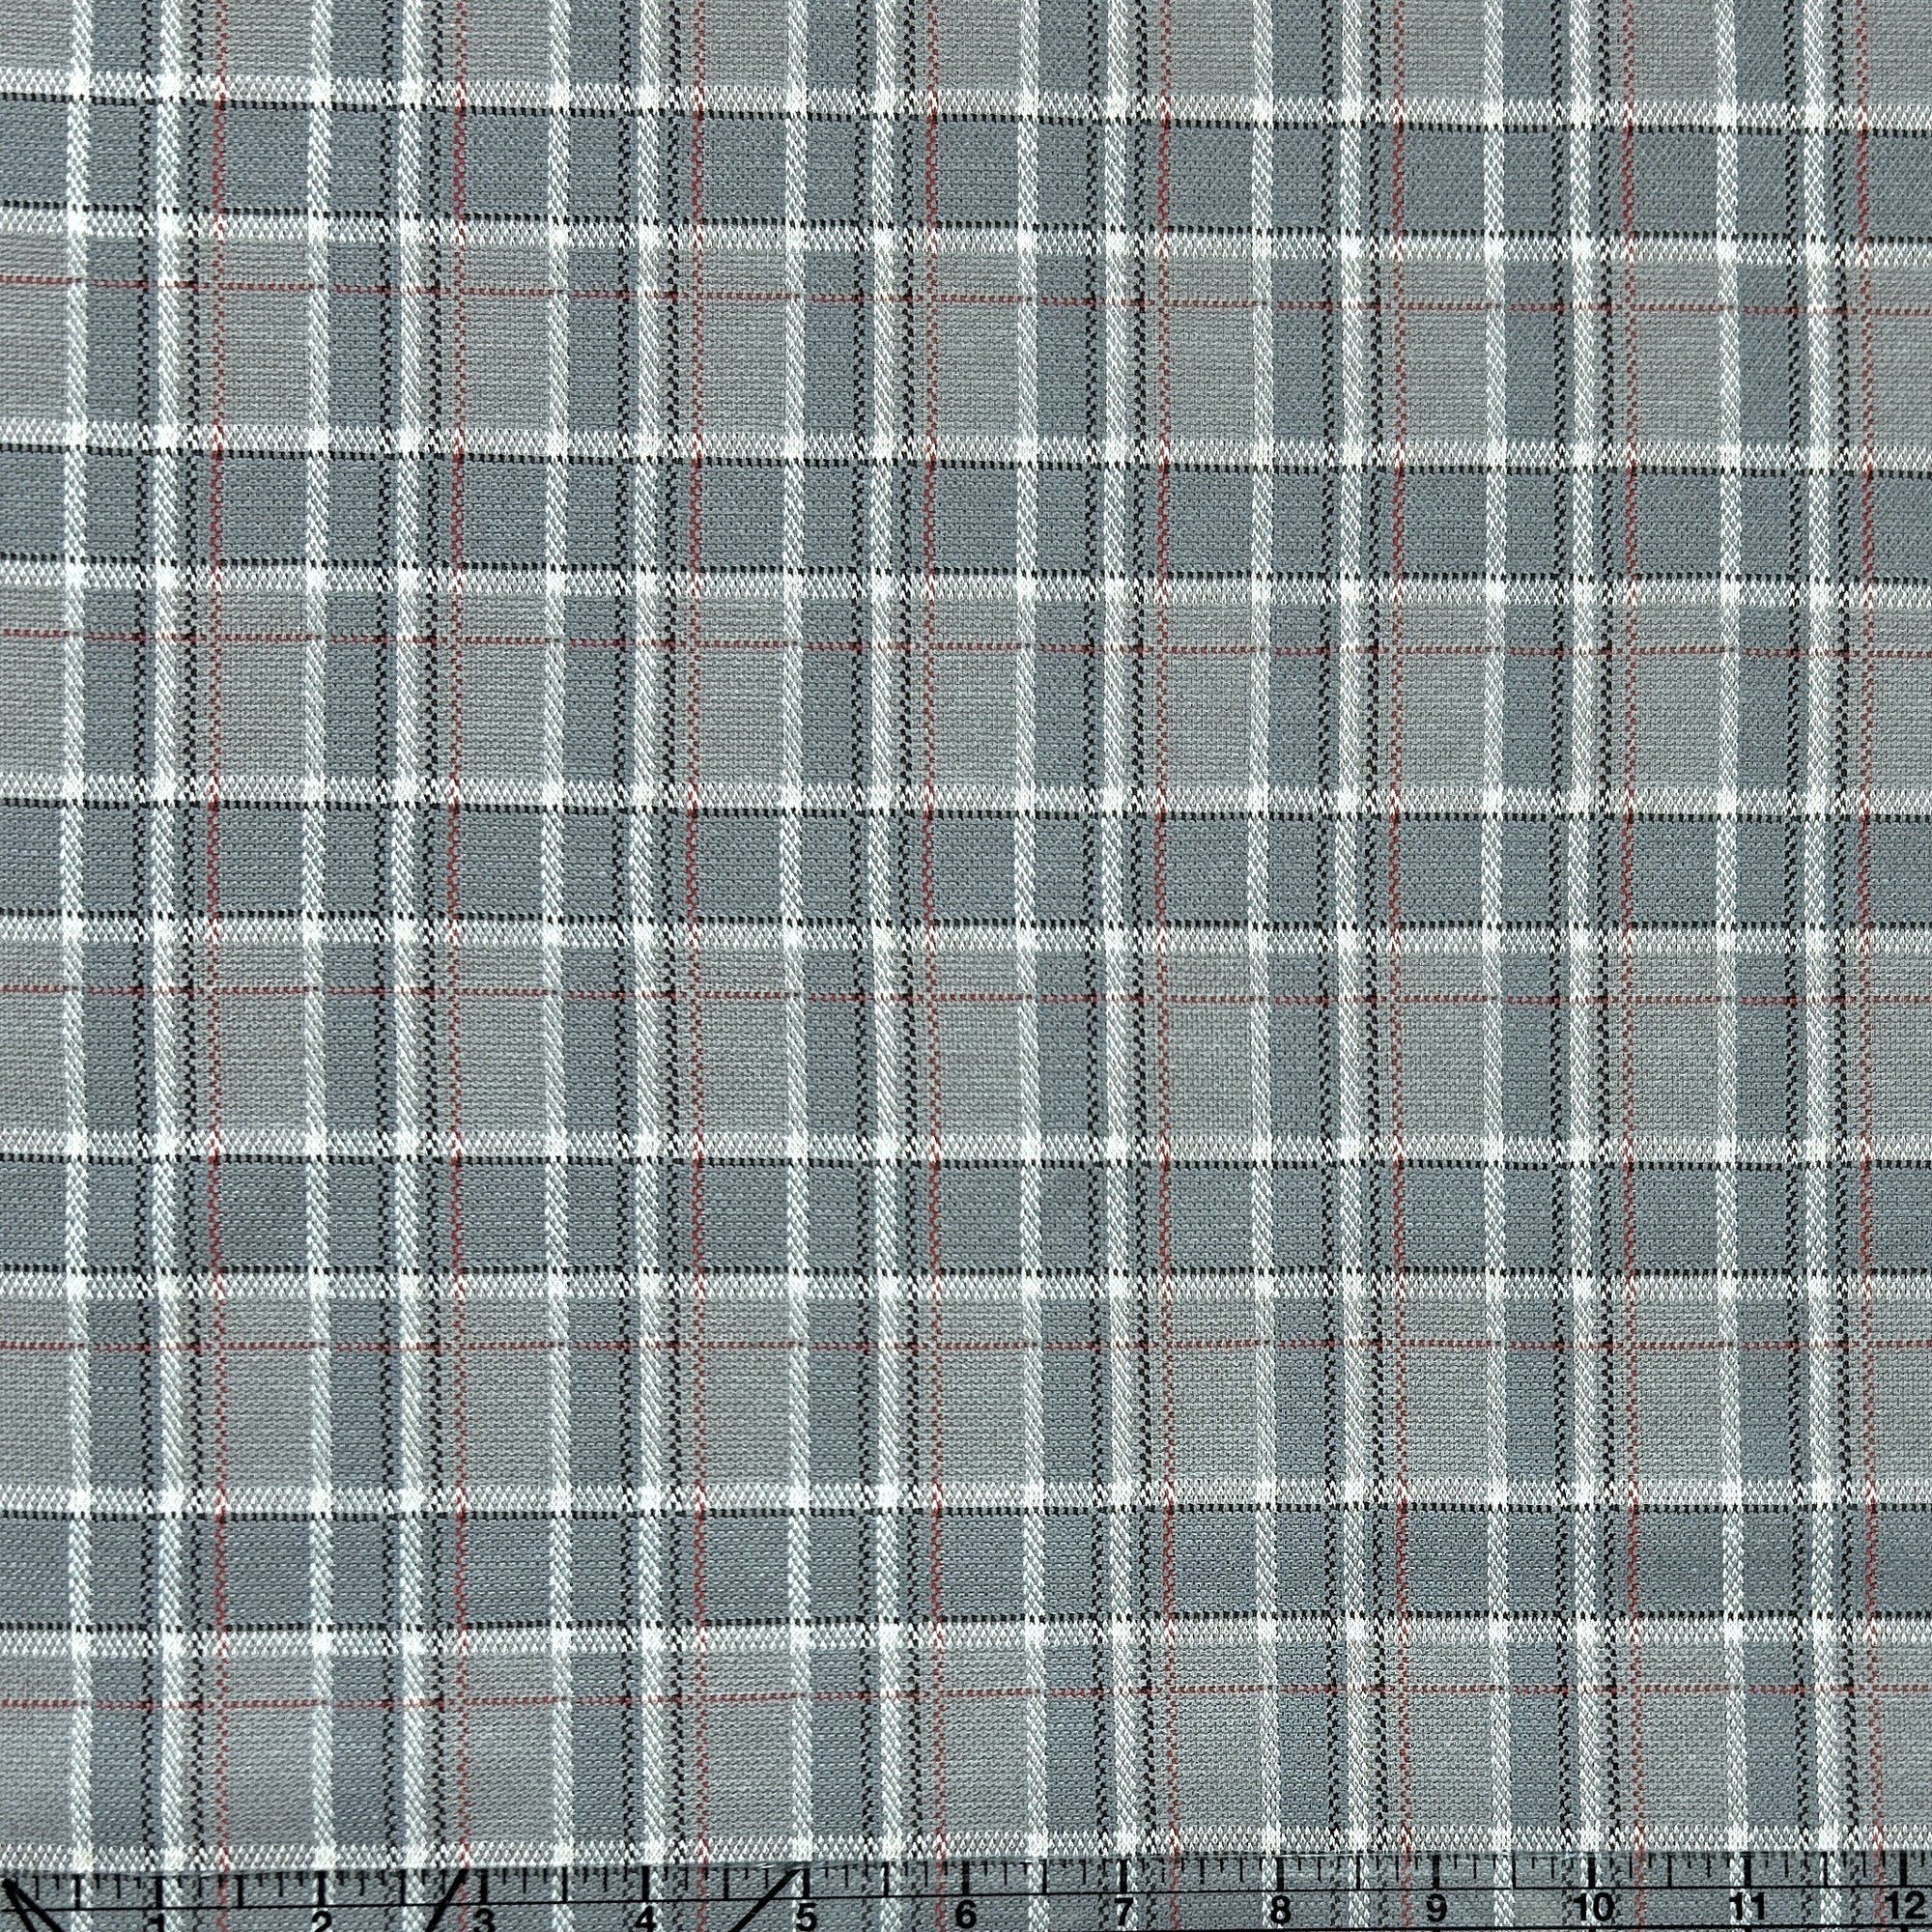 Tonal Grey White Red and Black Plaid Jacquard Double Knit Fabric